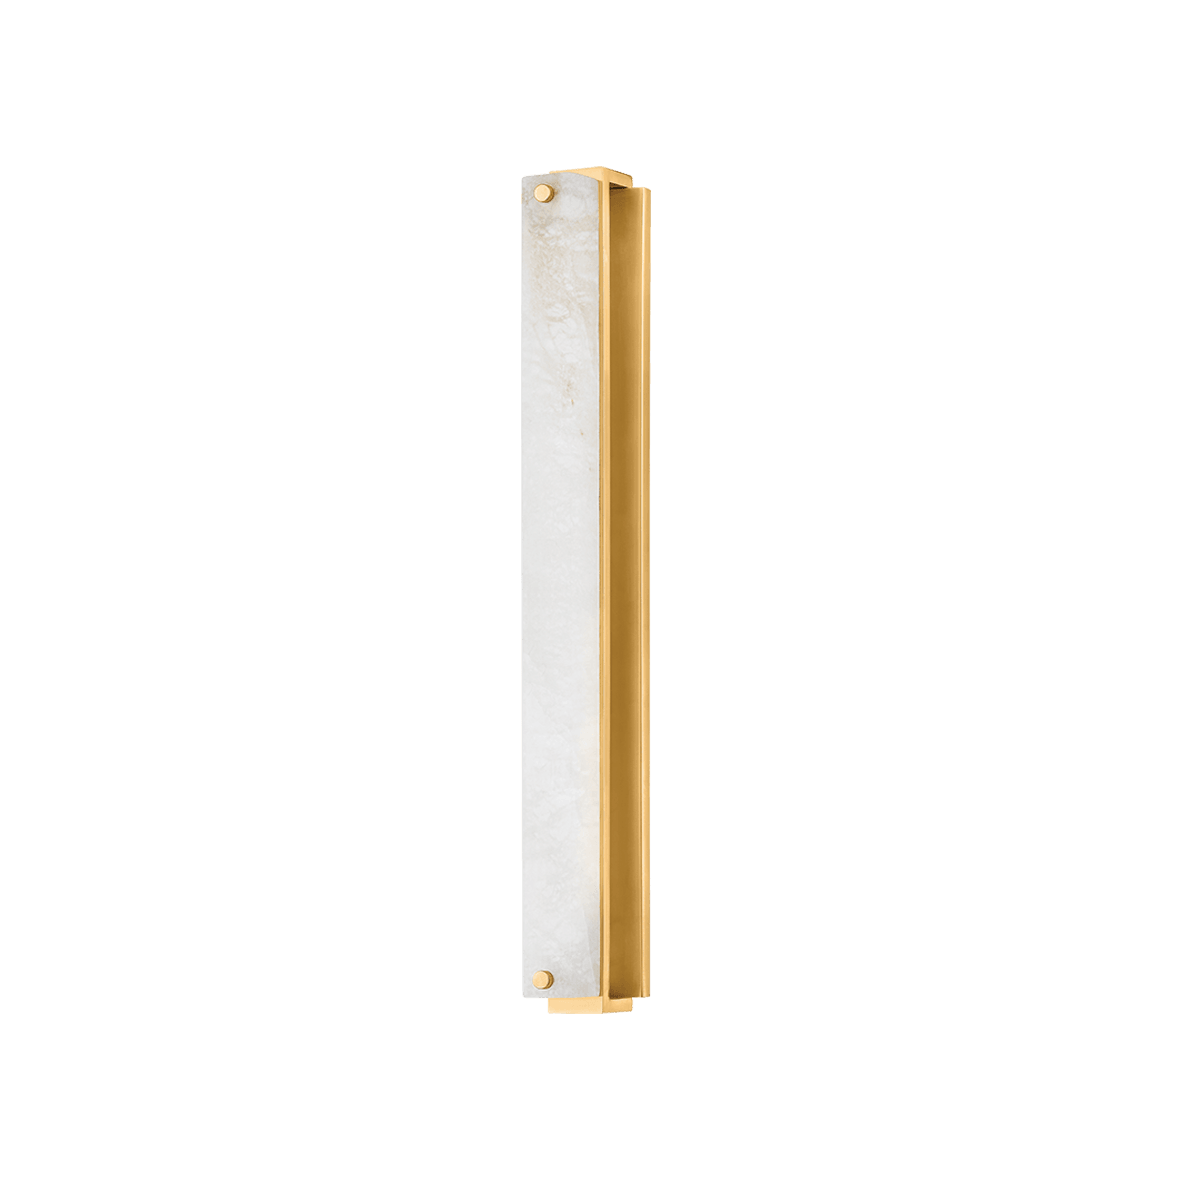 Hudson Valley Lighting - Edgemere LED Wall Sconce - 4051-AGB | Montreal Lighting & Hardware